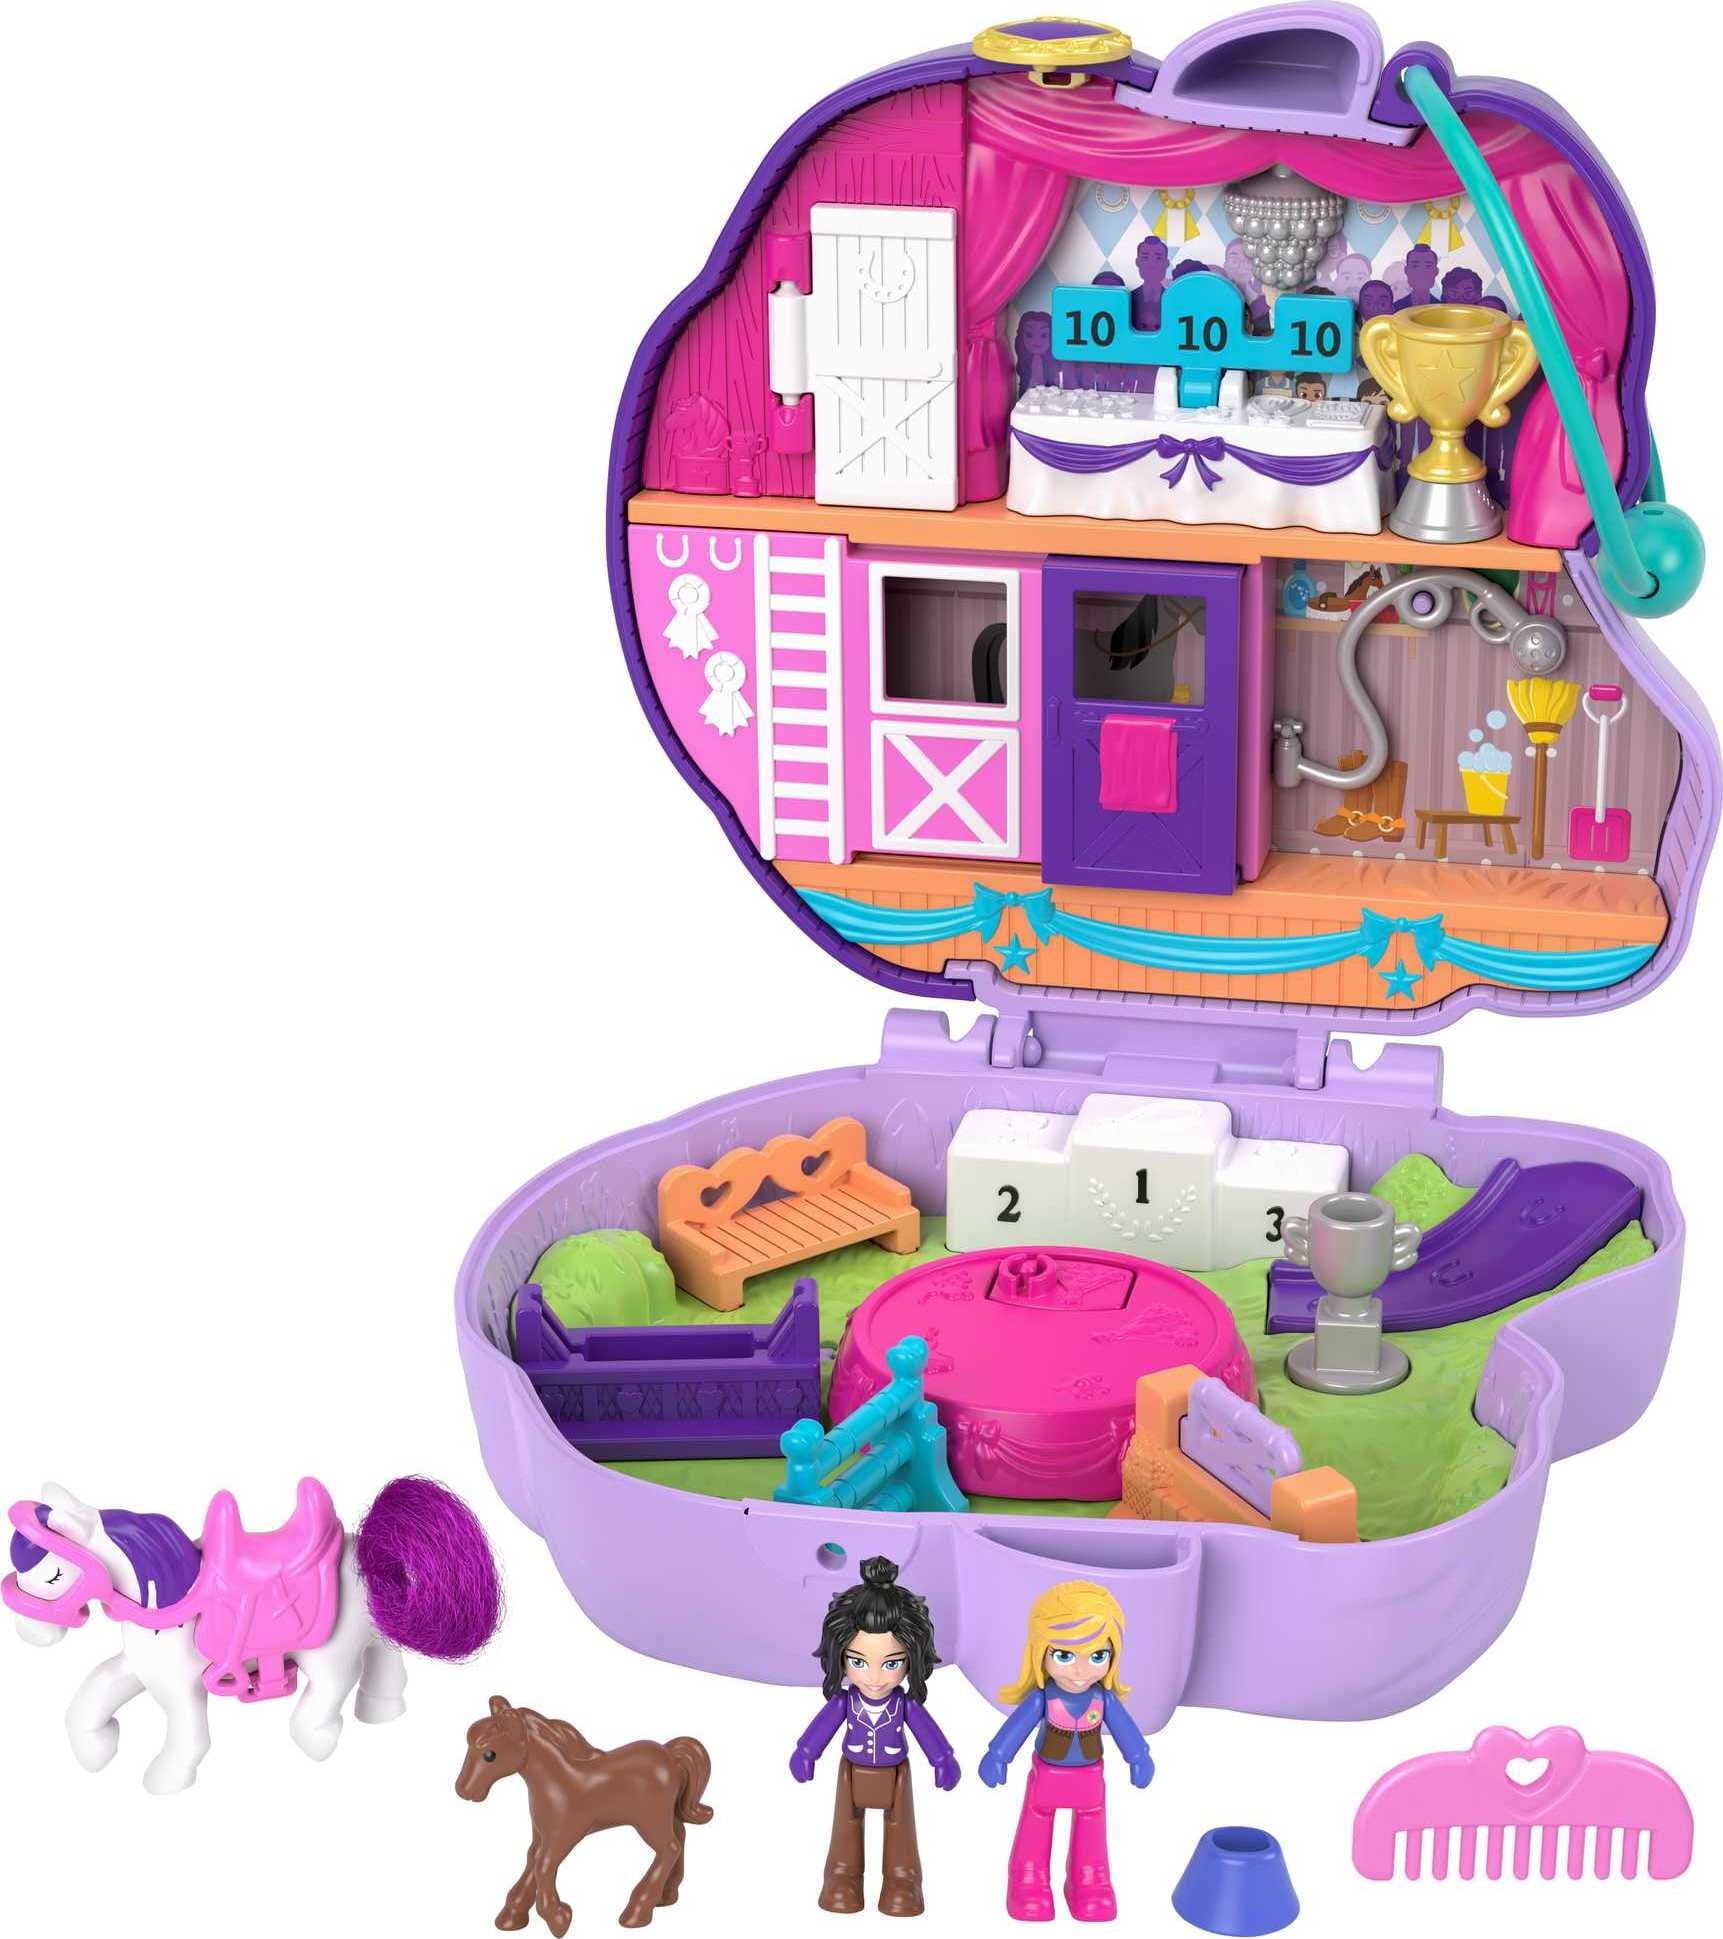 Mattel Polly Pocket Tiny Takeaway Doll Set GFP67 for sale online